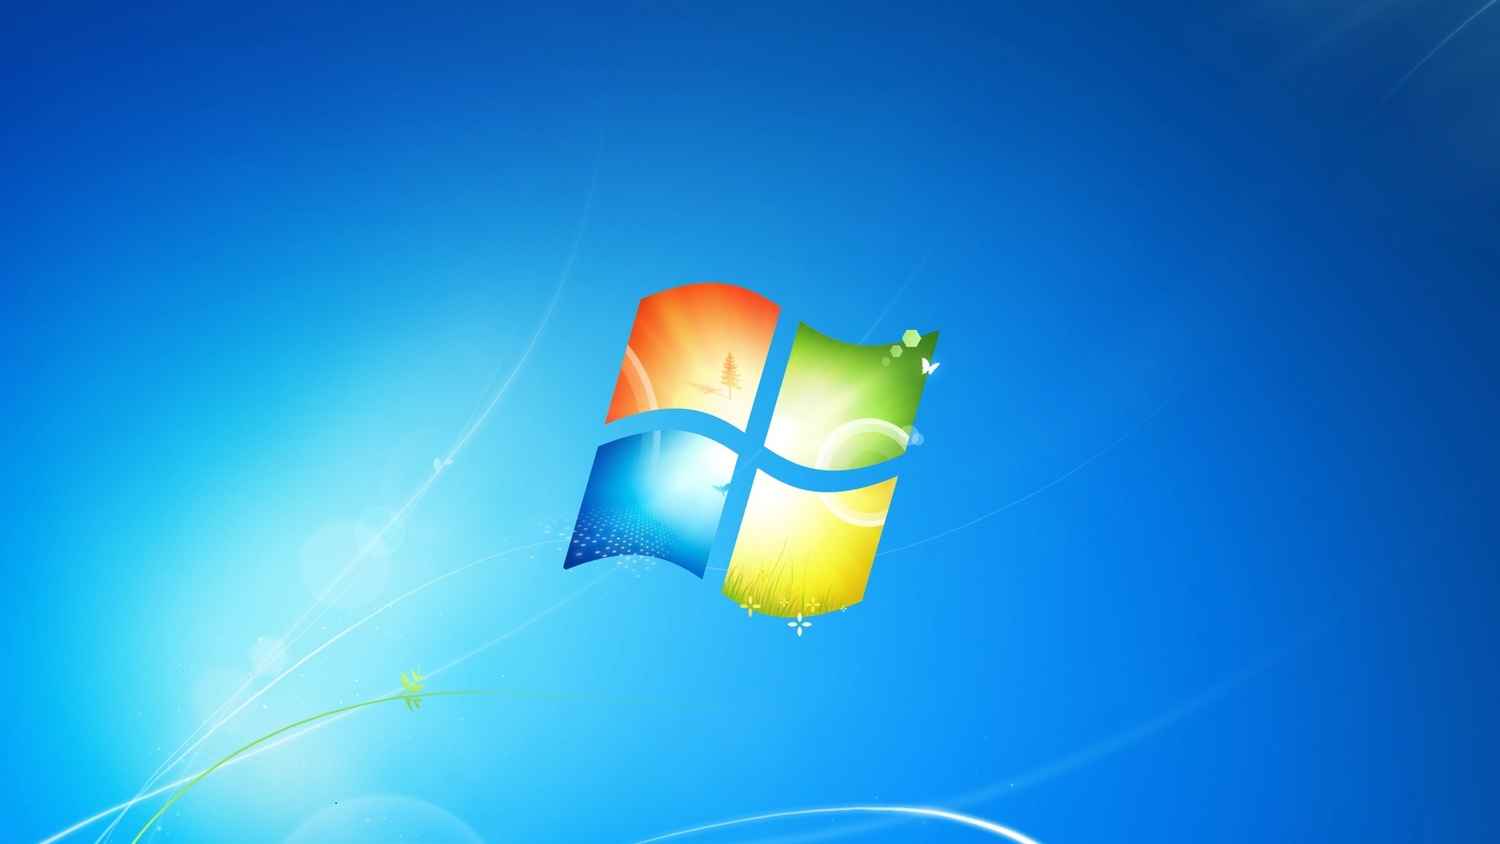 Heres how you can officially download Windows 7 from the official Microsoft website